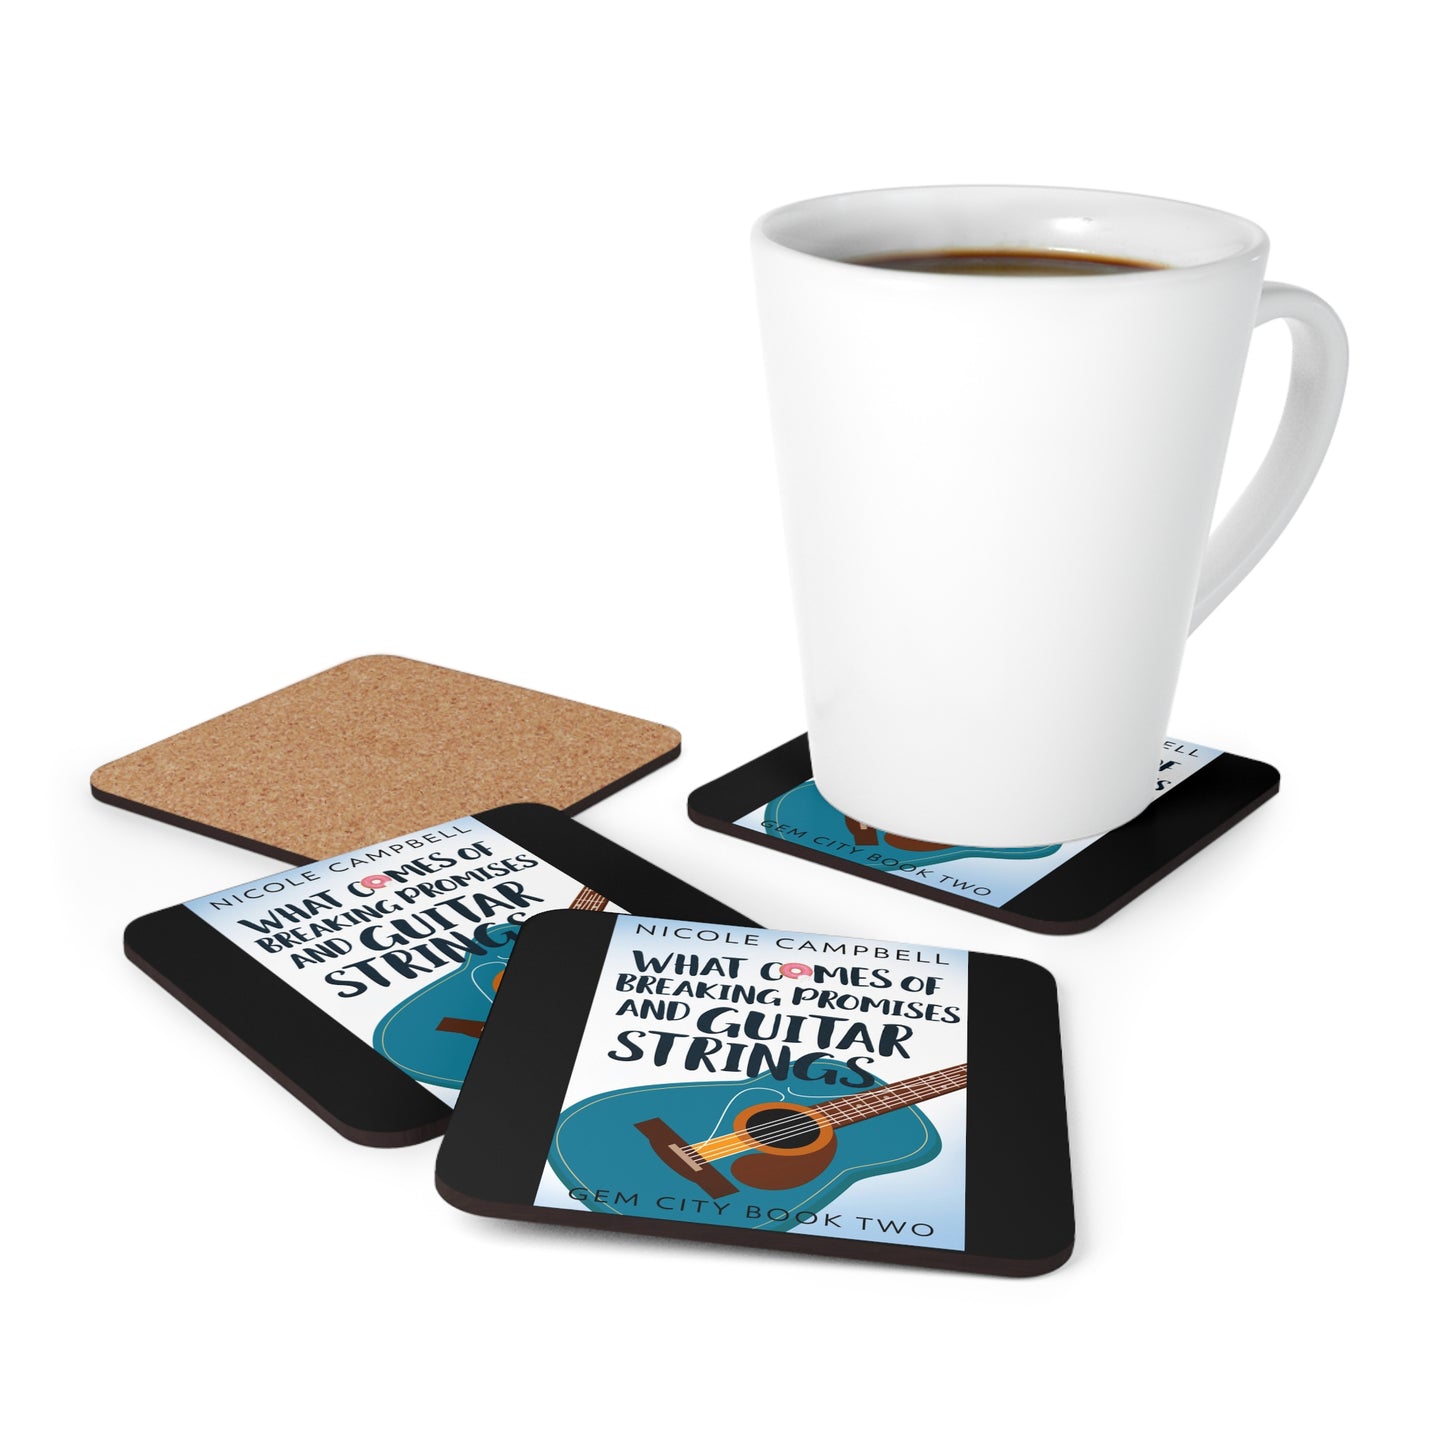 What Comes of Breaking Promises and Guitar Strings - Corkwood Coaster Set